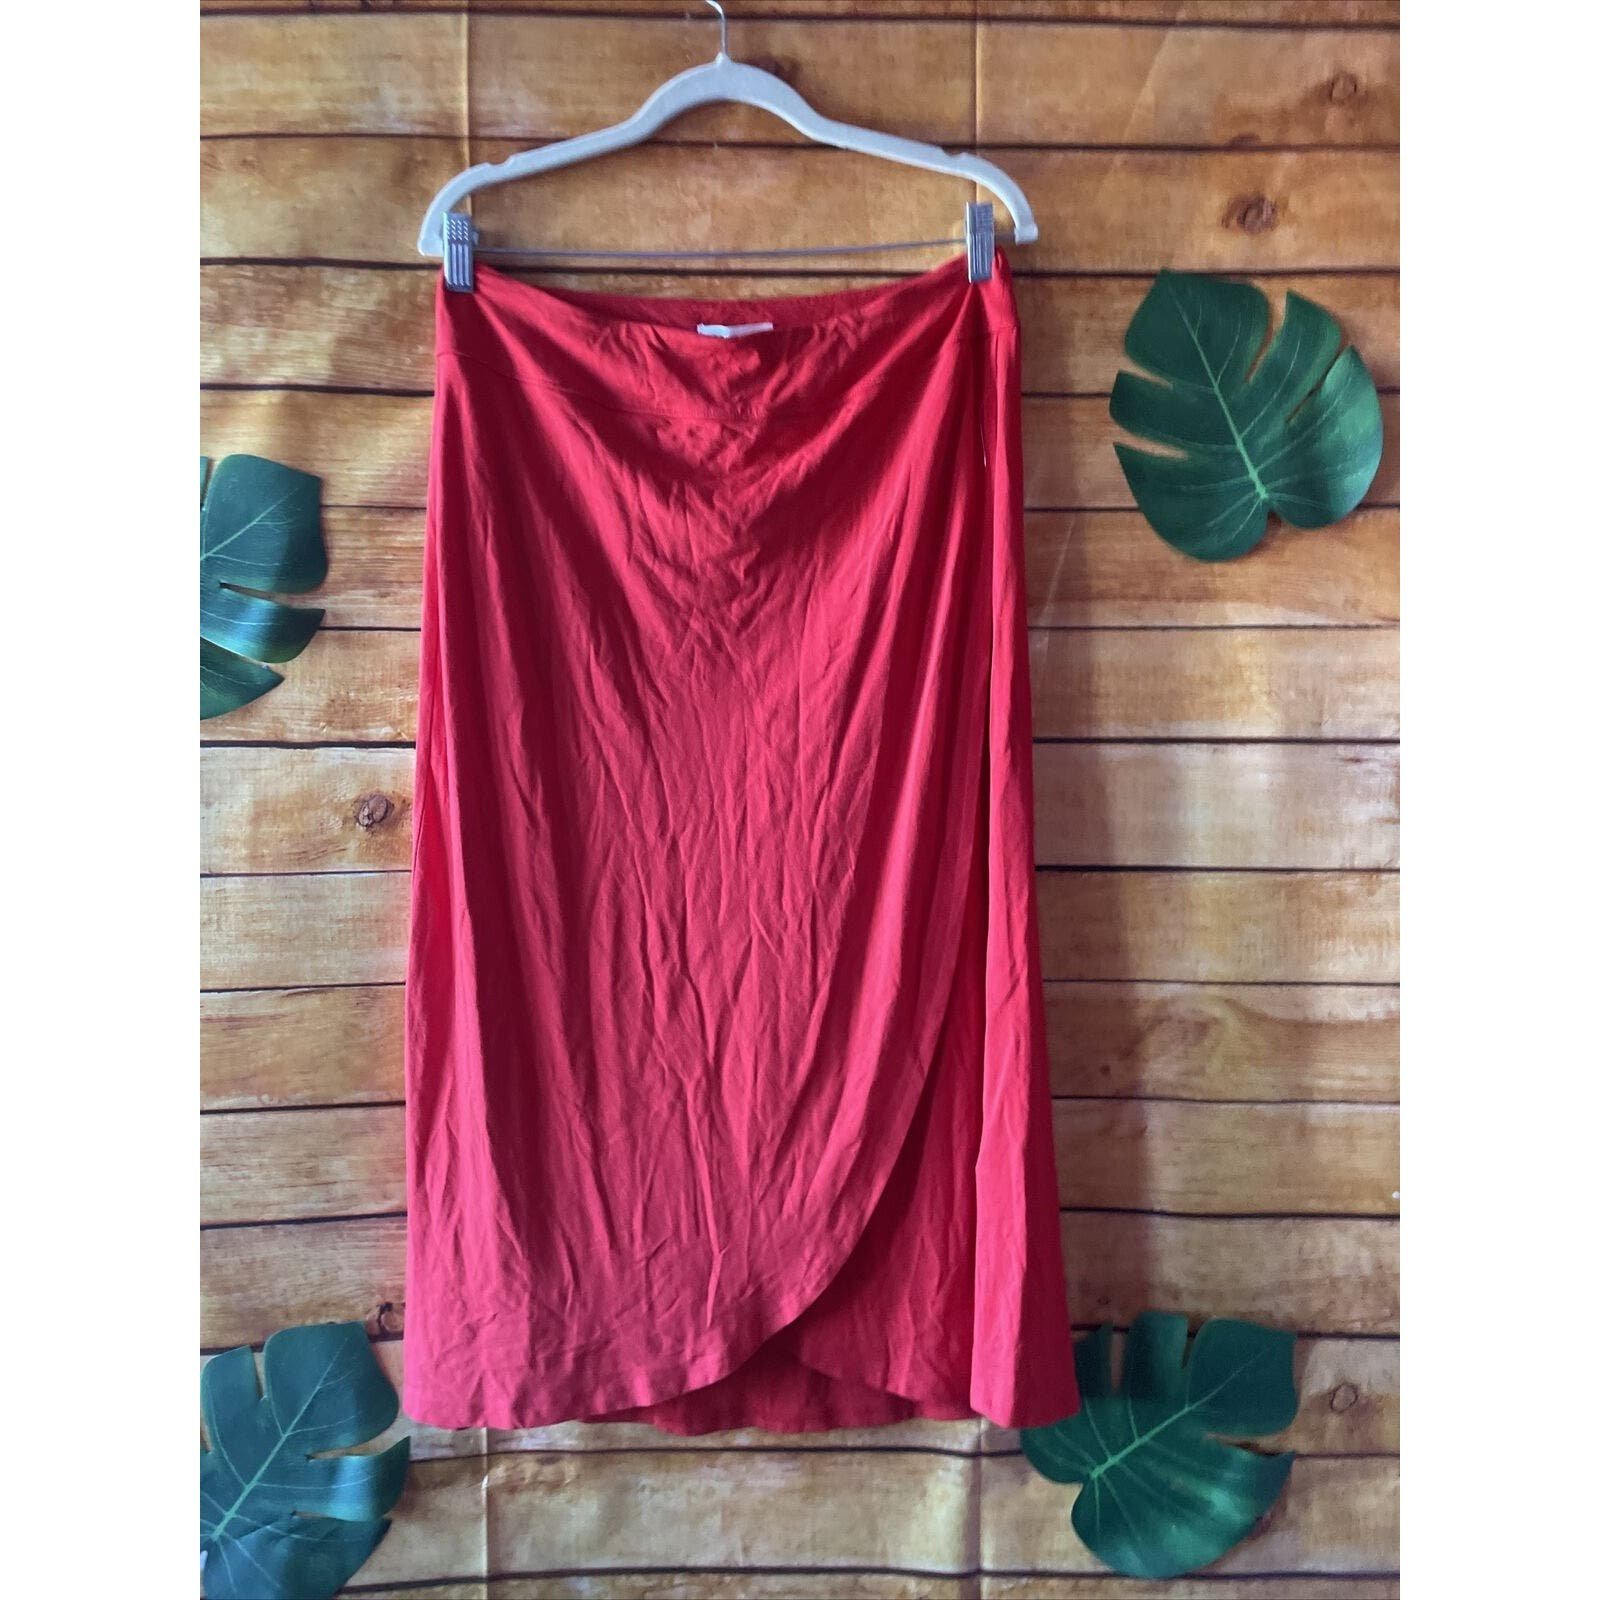 Personality Artisan Ny Midi Red Skirt Size L NWT HL5kW3IVh hot sale